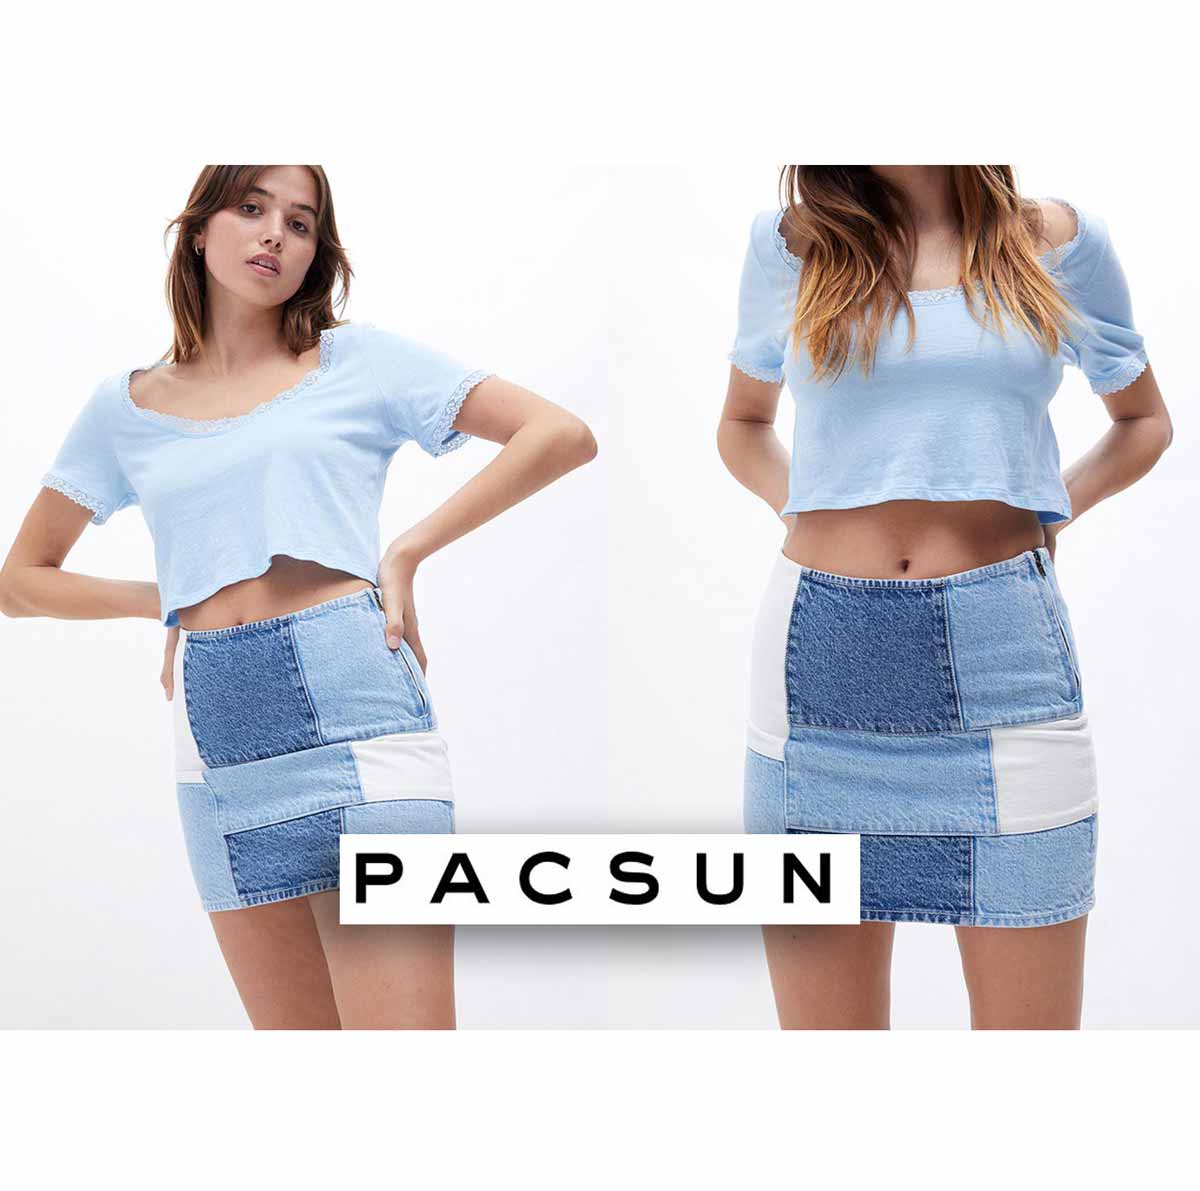 pacsun-size-chart-for-women-s-and-men-clothing-size-charts